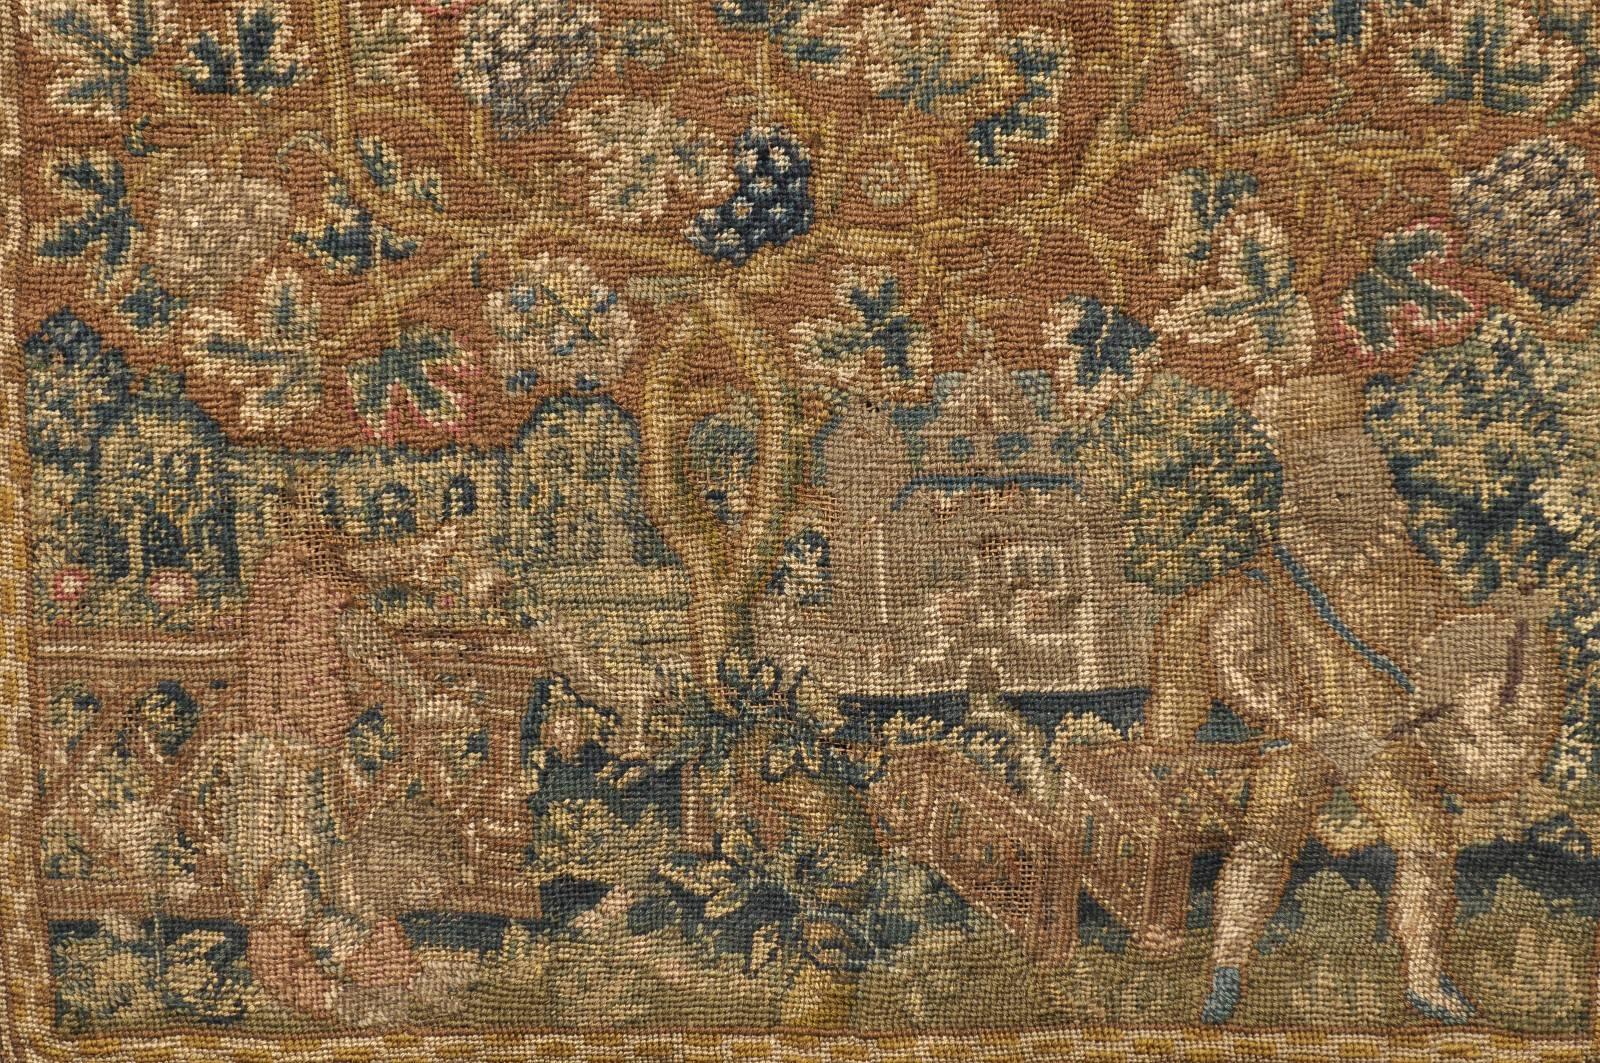 Pair of Framed 17th Century Tapestries, Brussels 1